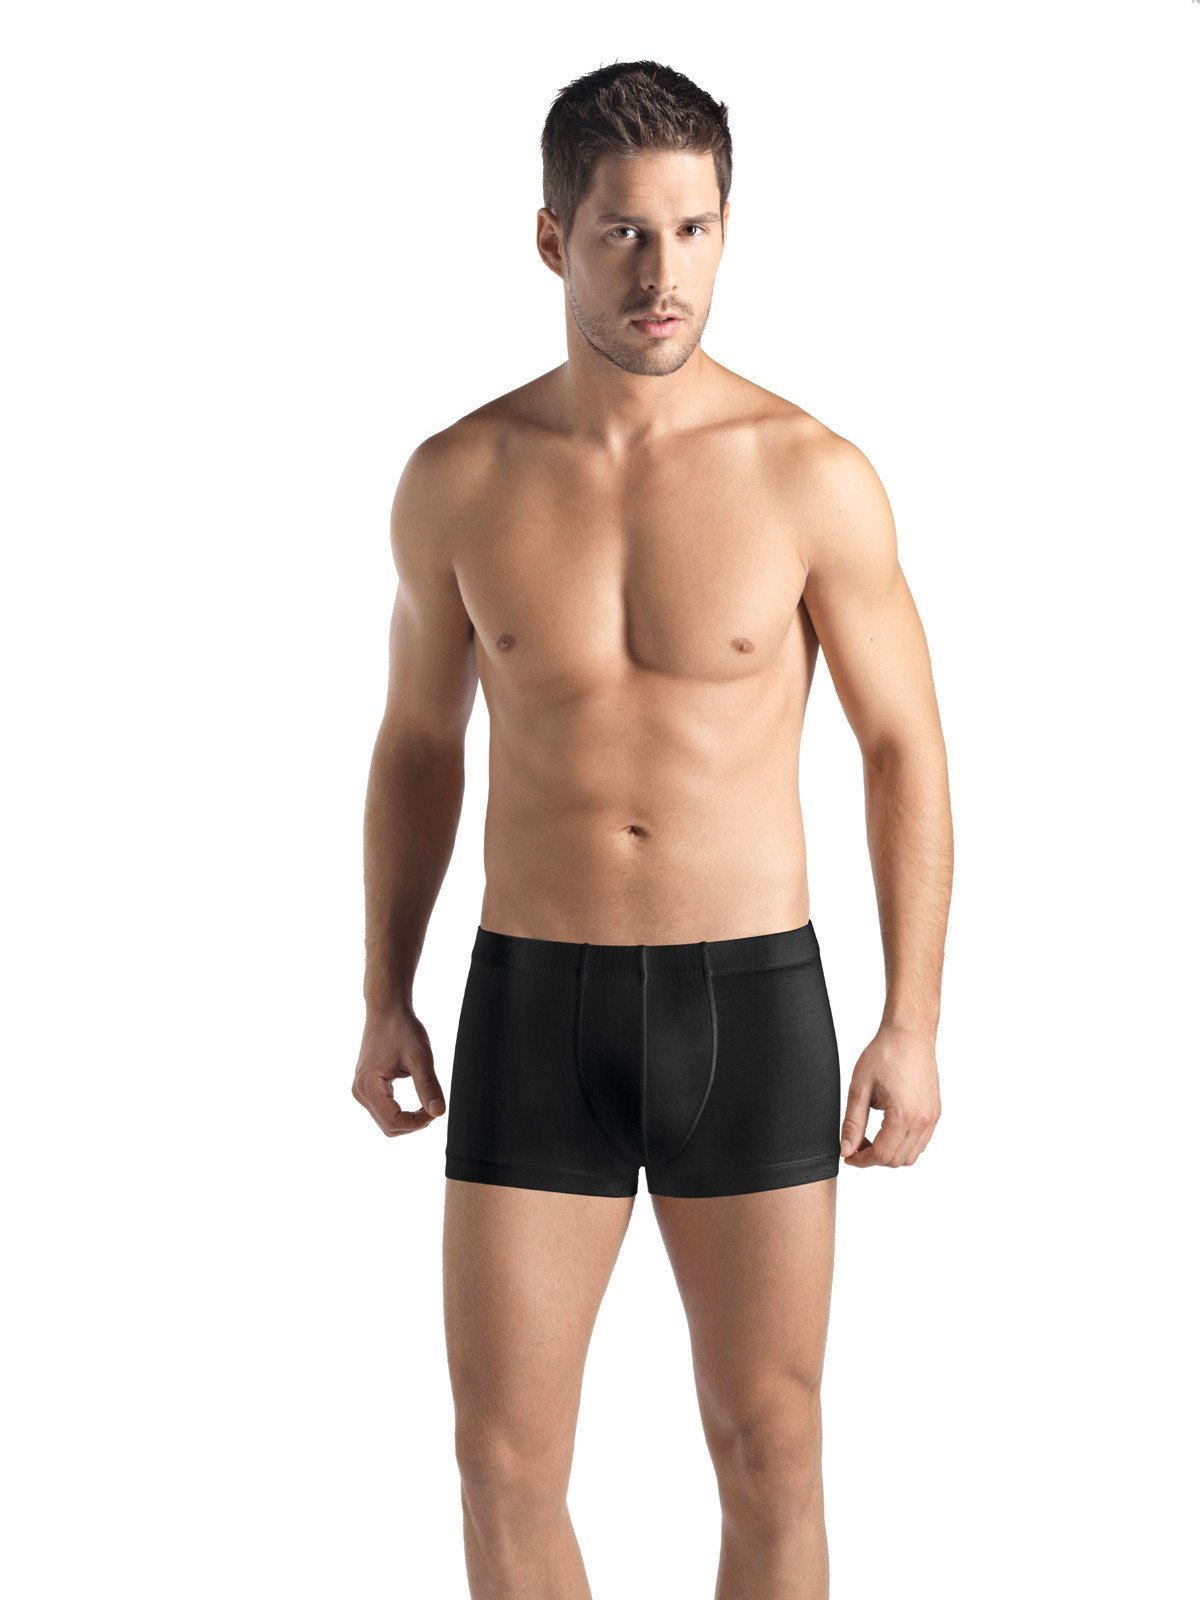 Figure fitting 100% Pure Cotton Short Boxer Shorts.  Available in Black and White.  Fabric Content: Mercerised Cotton. Made in Europe.